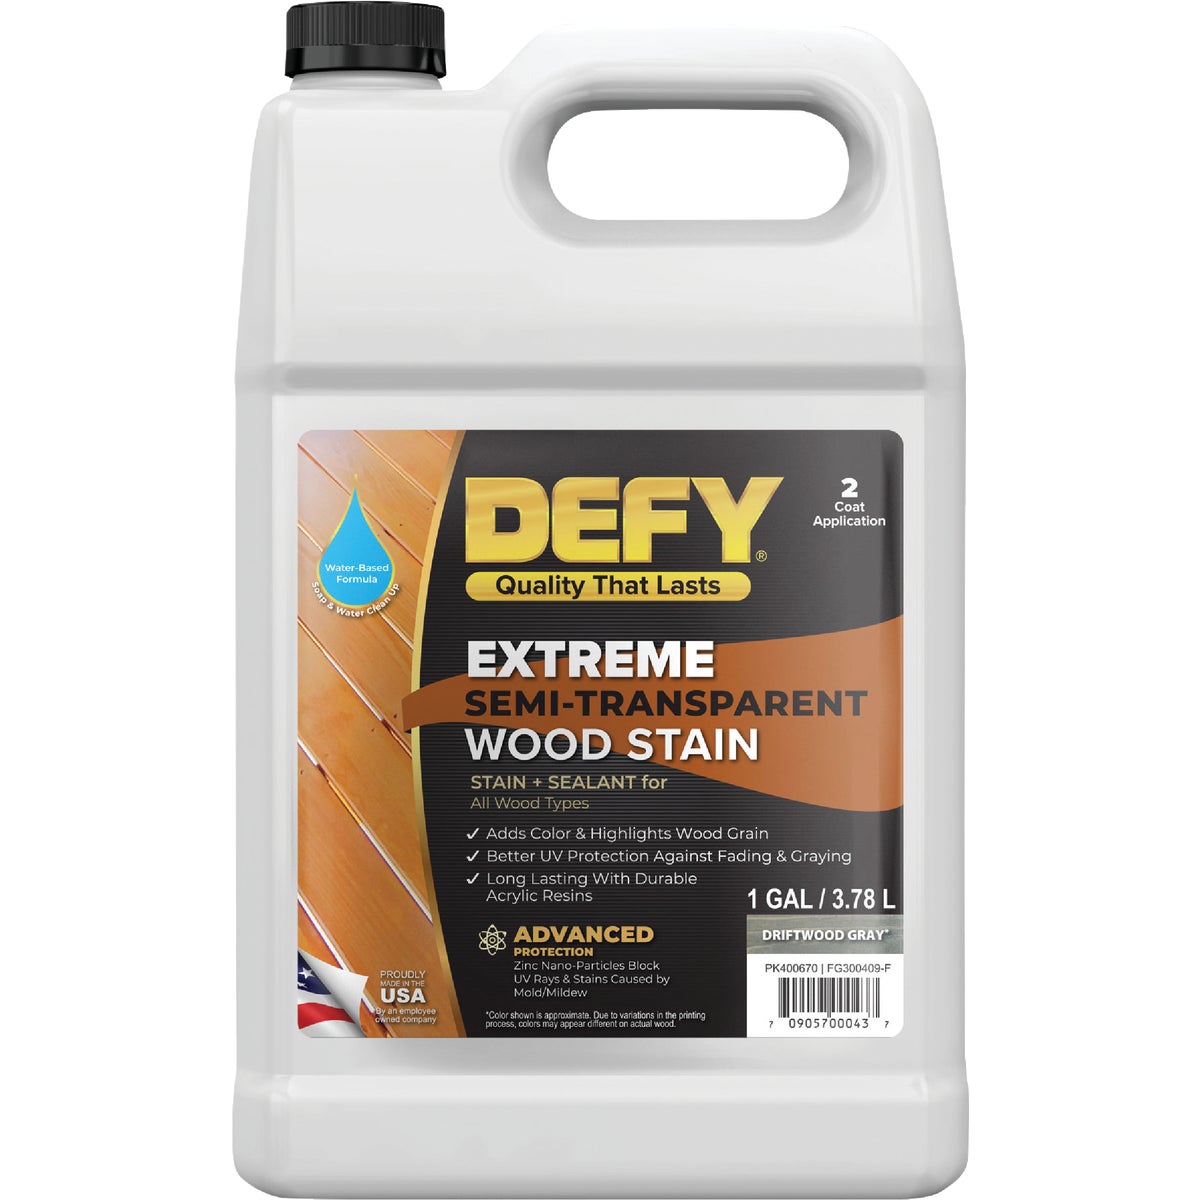 DEFY Extreme Semi-Transparent Exterior Wood Stain, Driftwood Gray, 1 Gal. Bottle